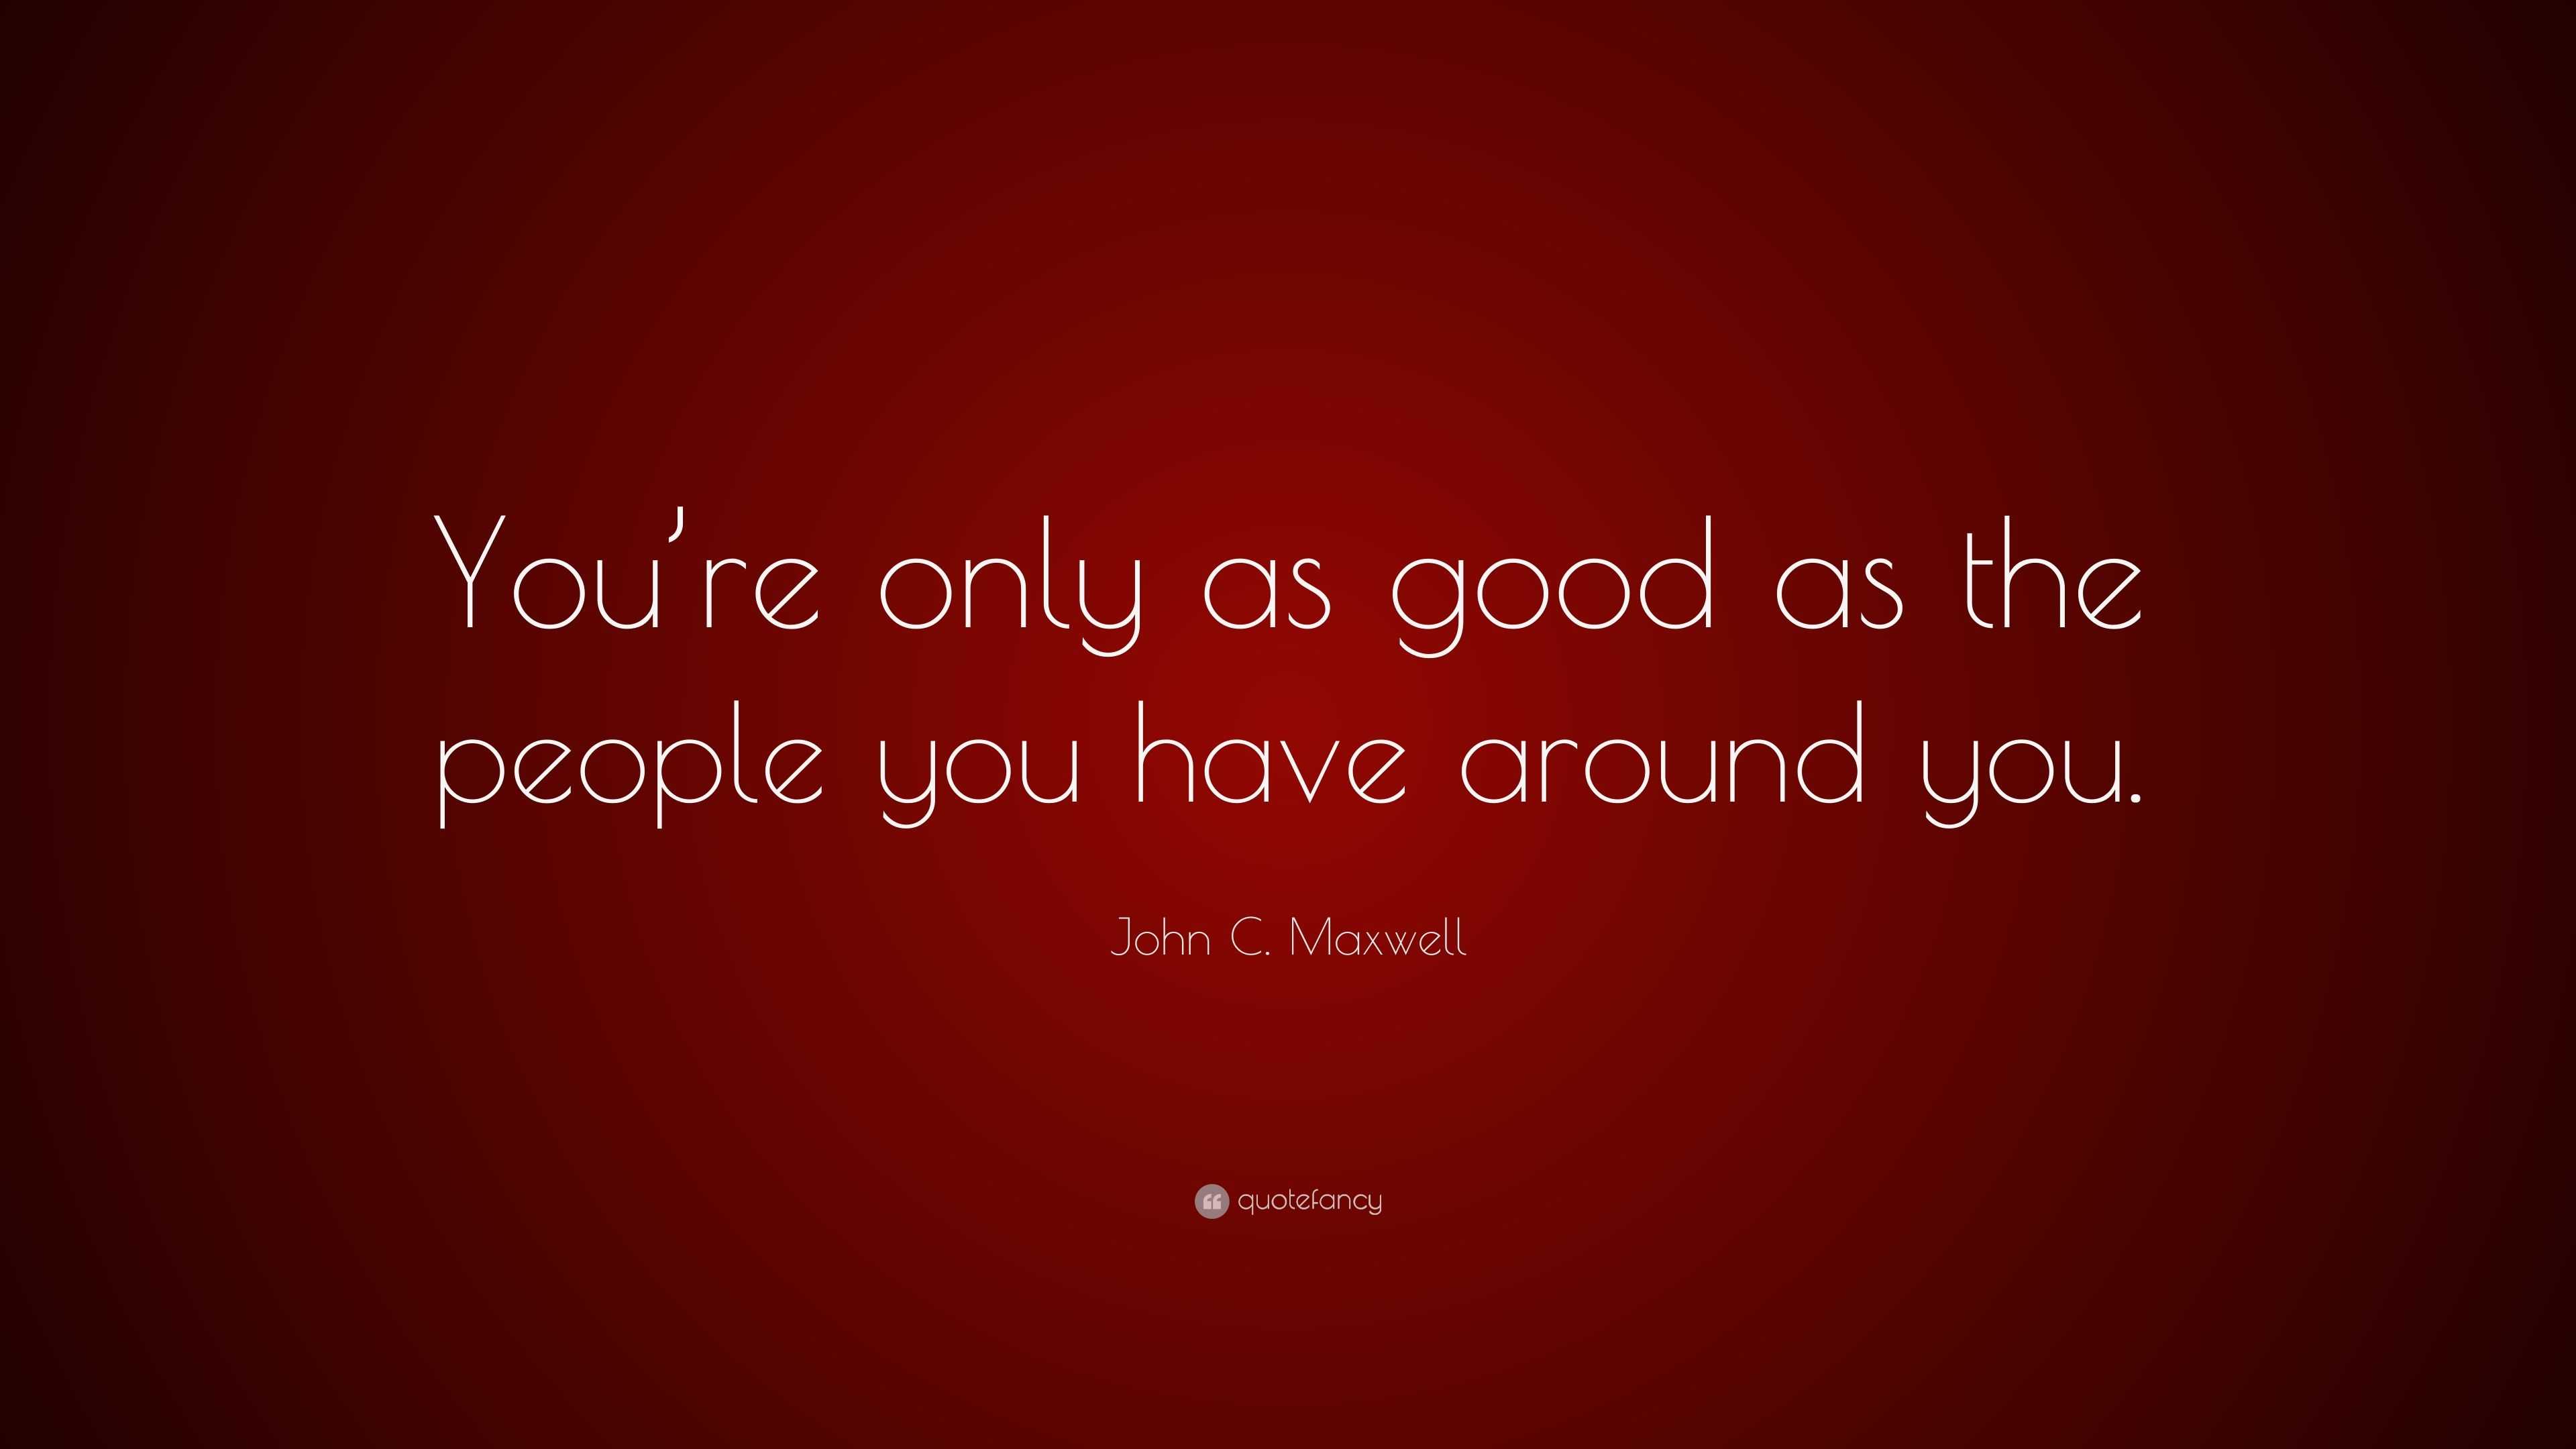 John C Maxwell Quote You Re Only As Good As The People You Have Around You